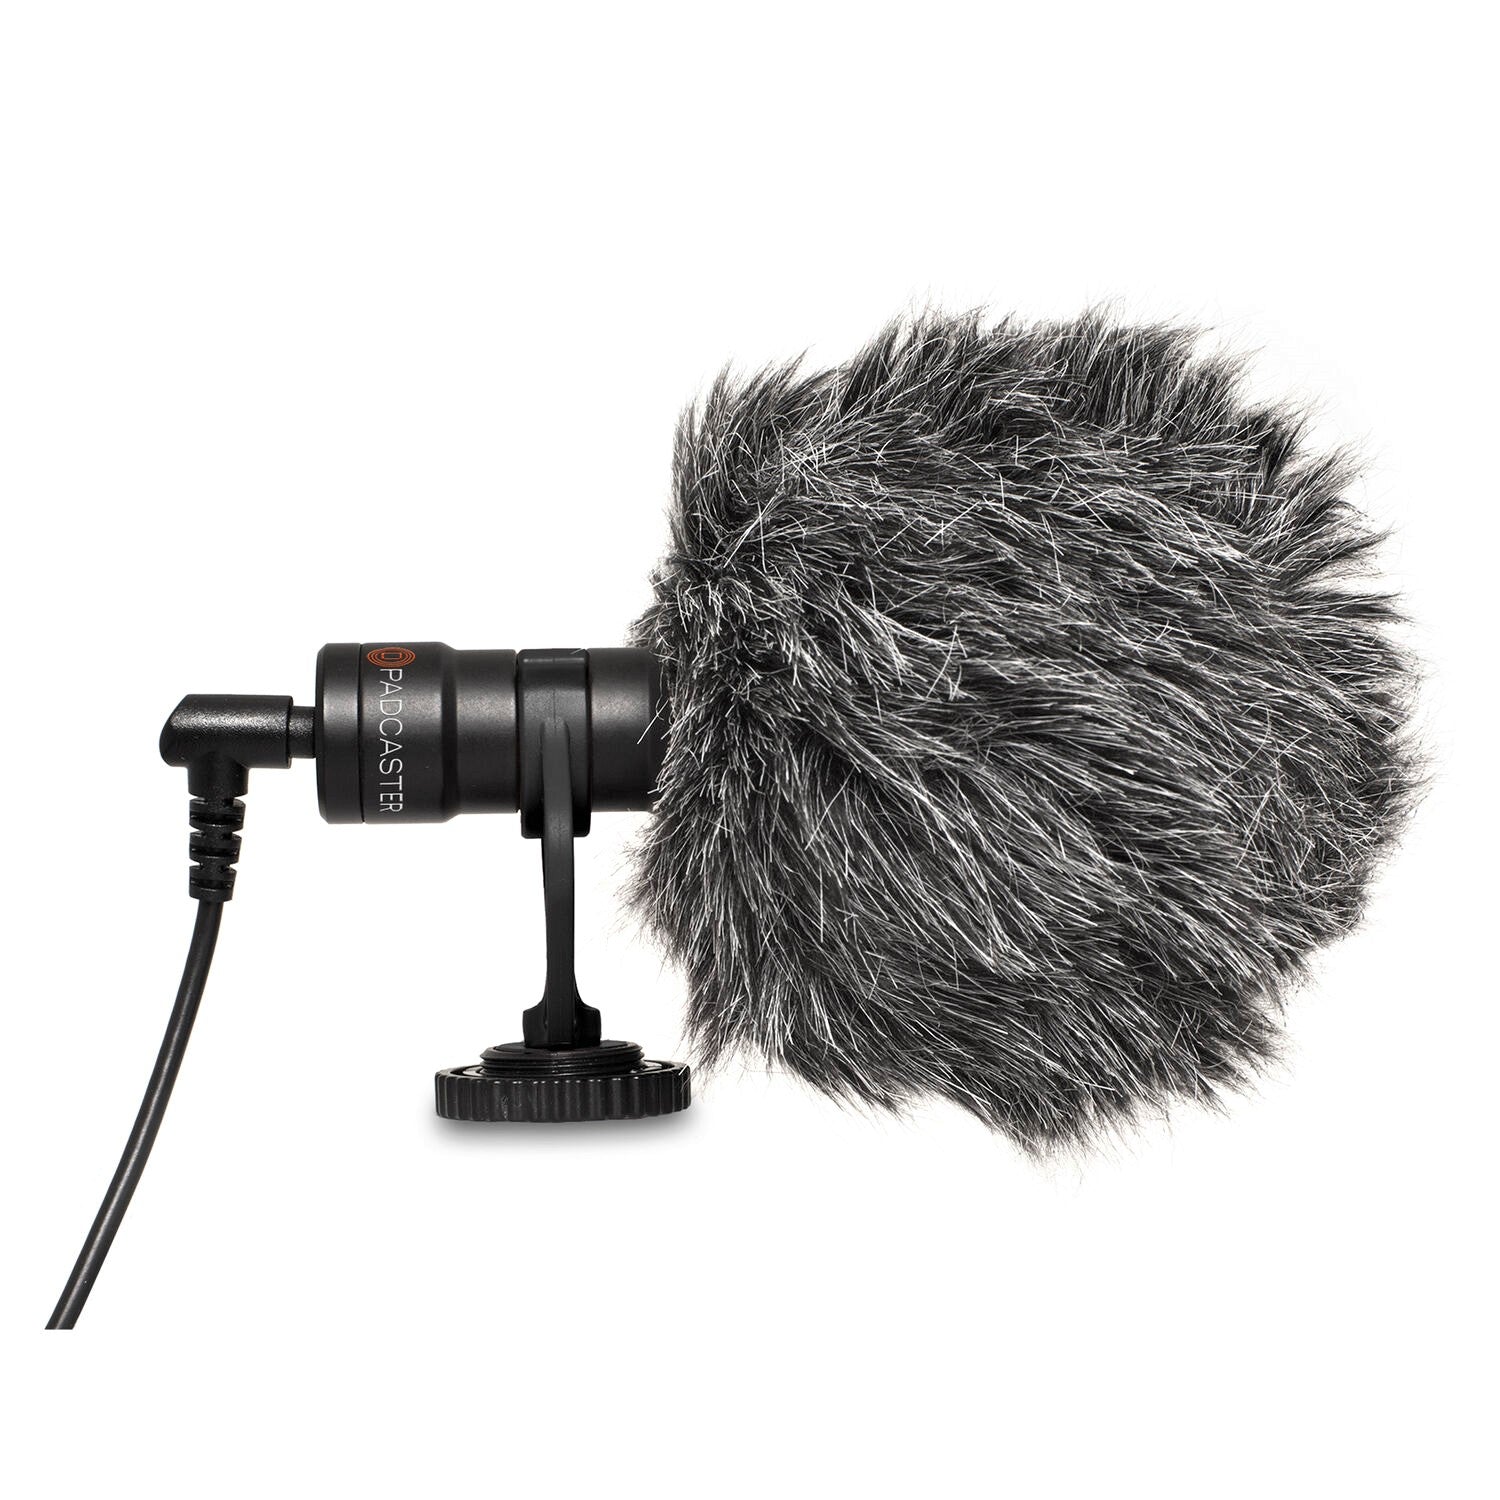 Padcaster Mini Microphone with Fuzzy Windscreen